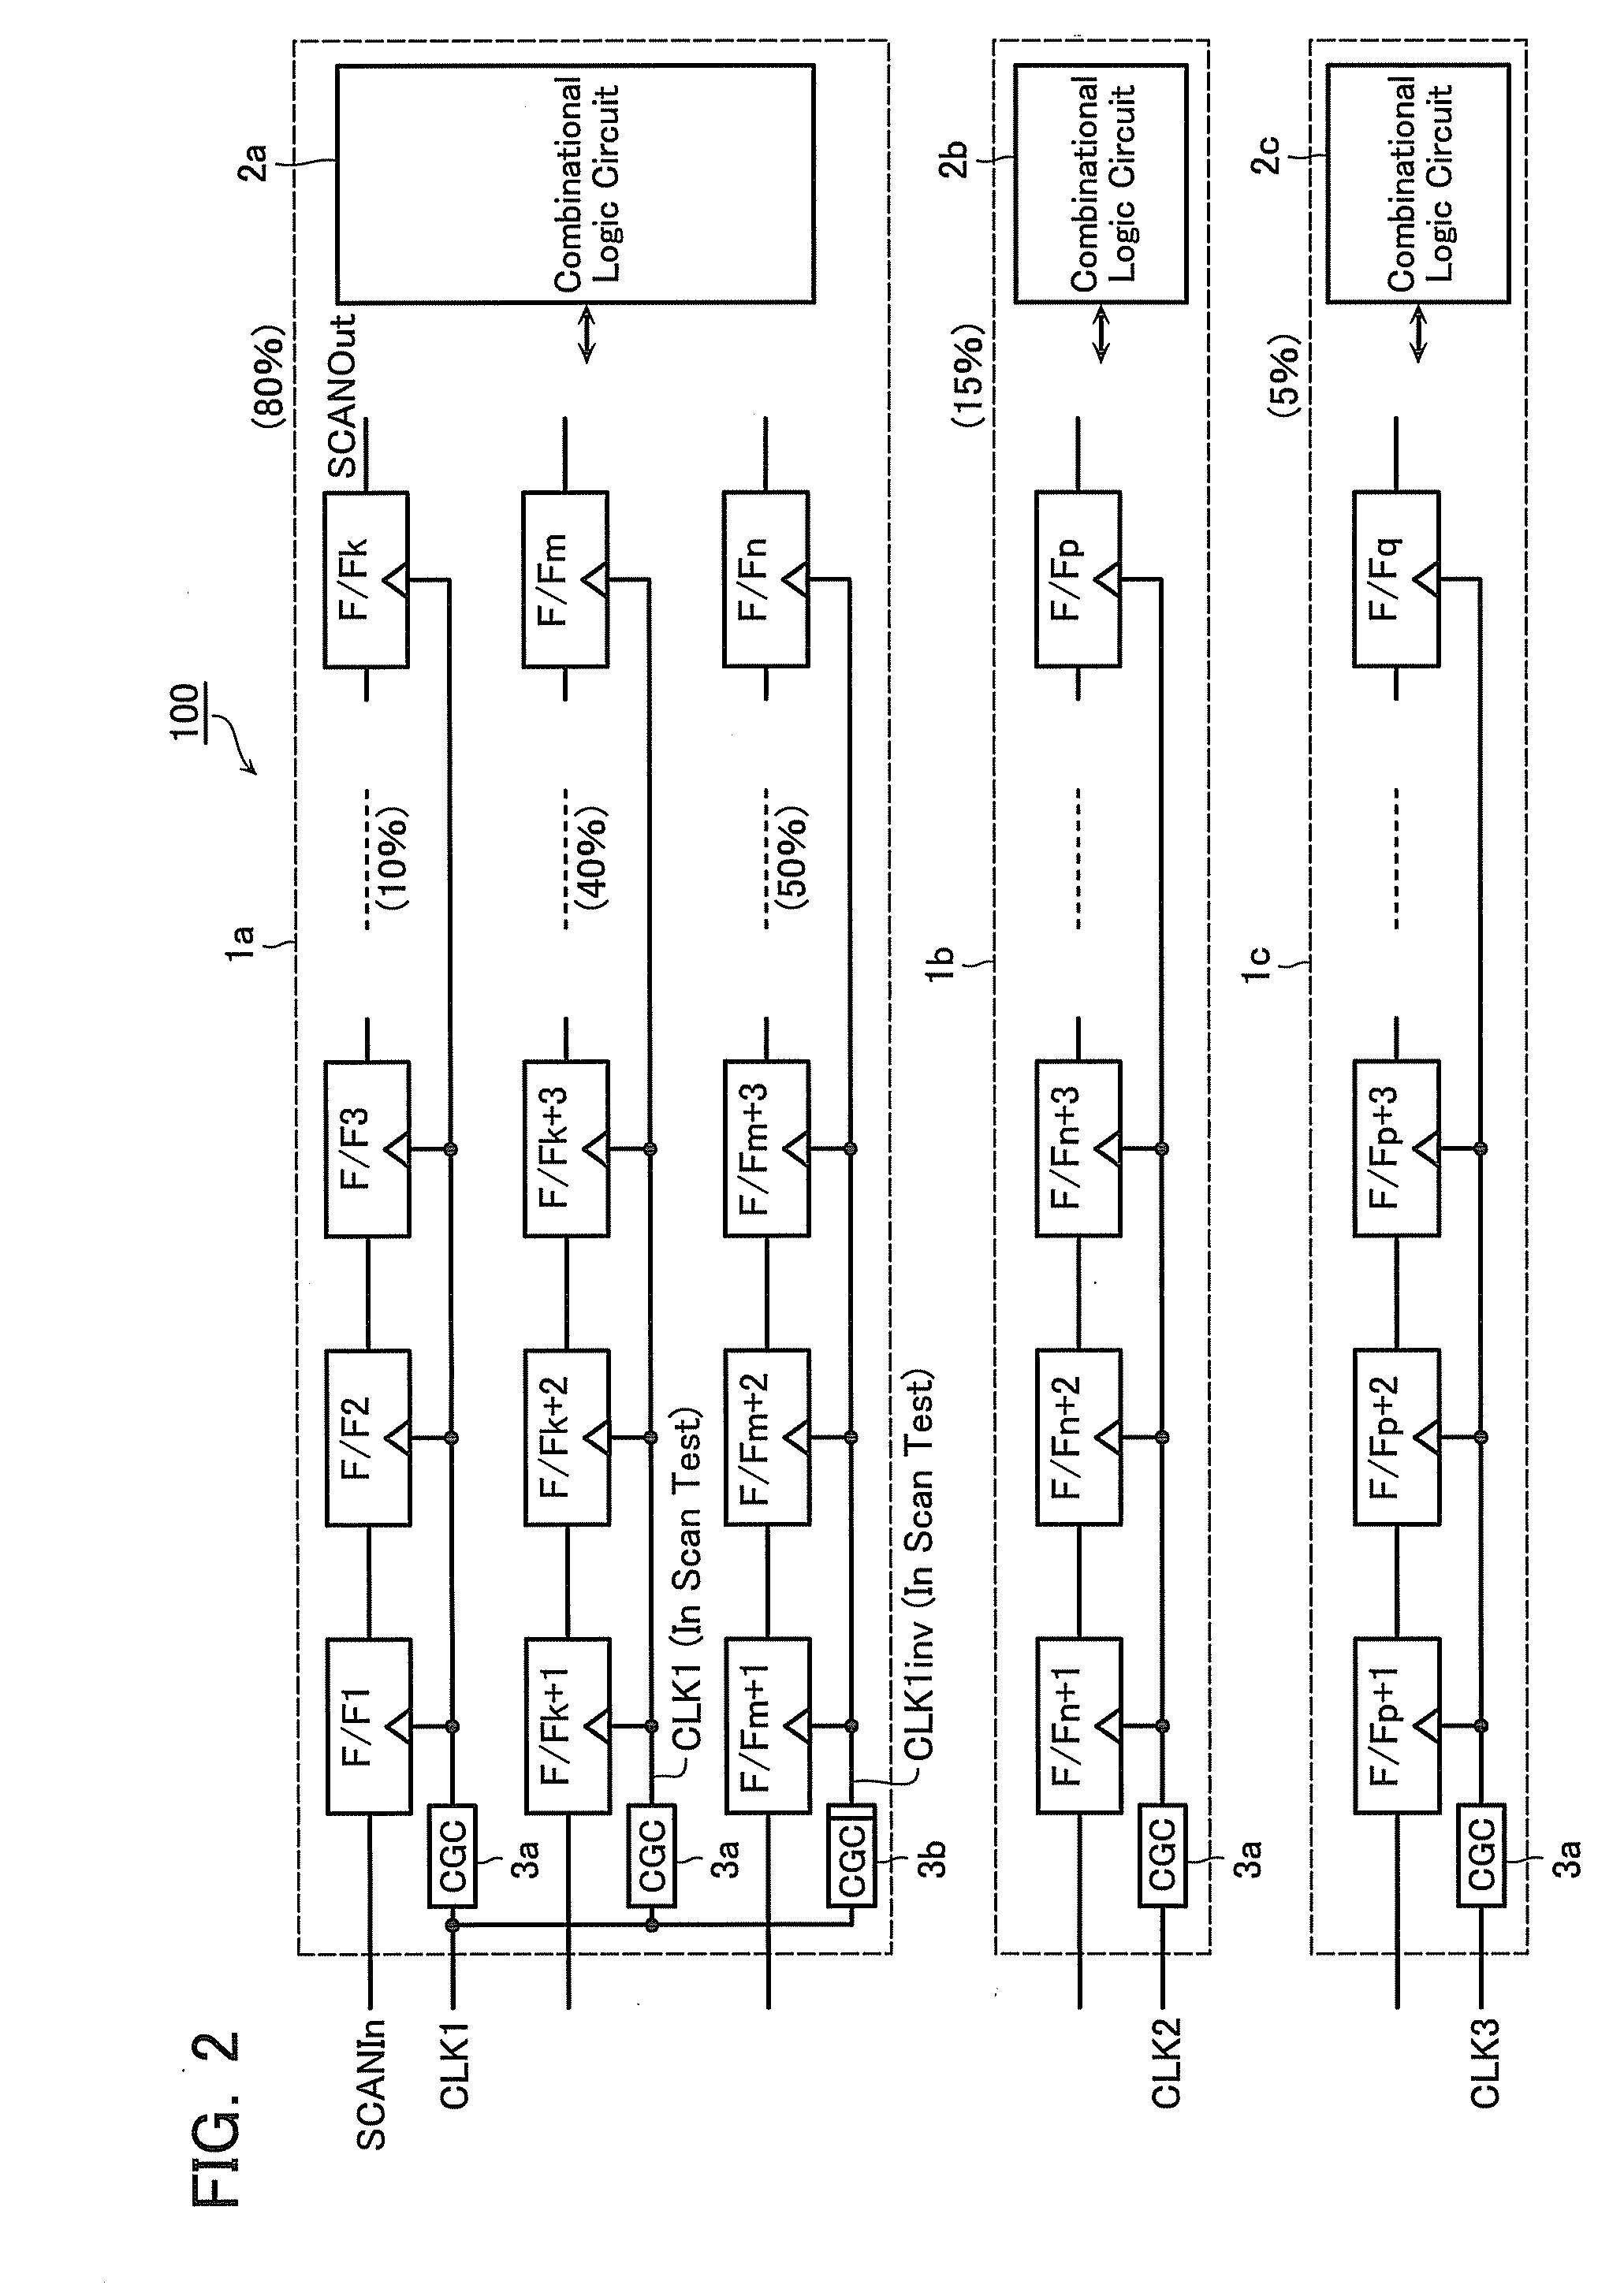 Semiconductor integrated circuit and design automation system